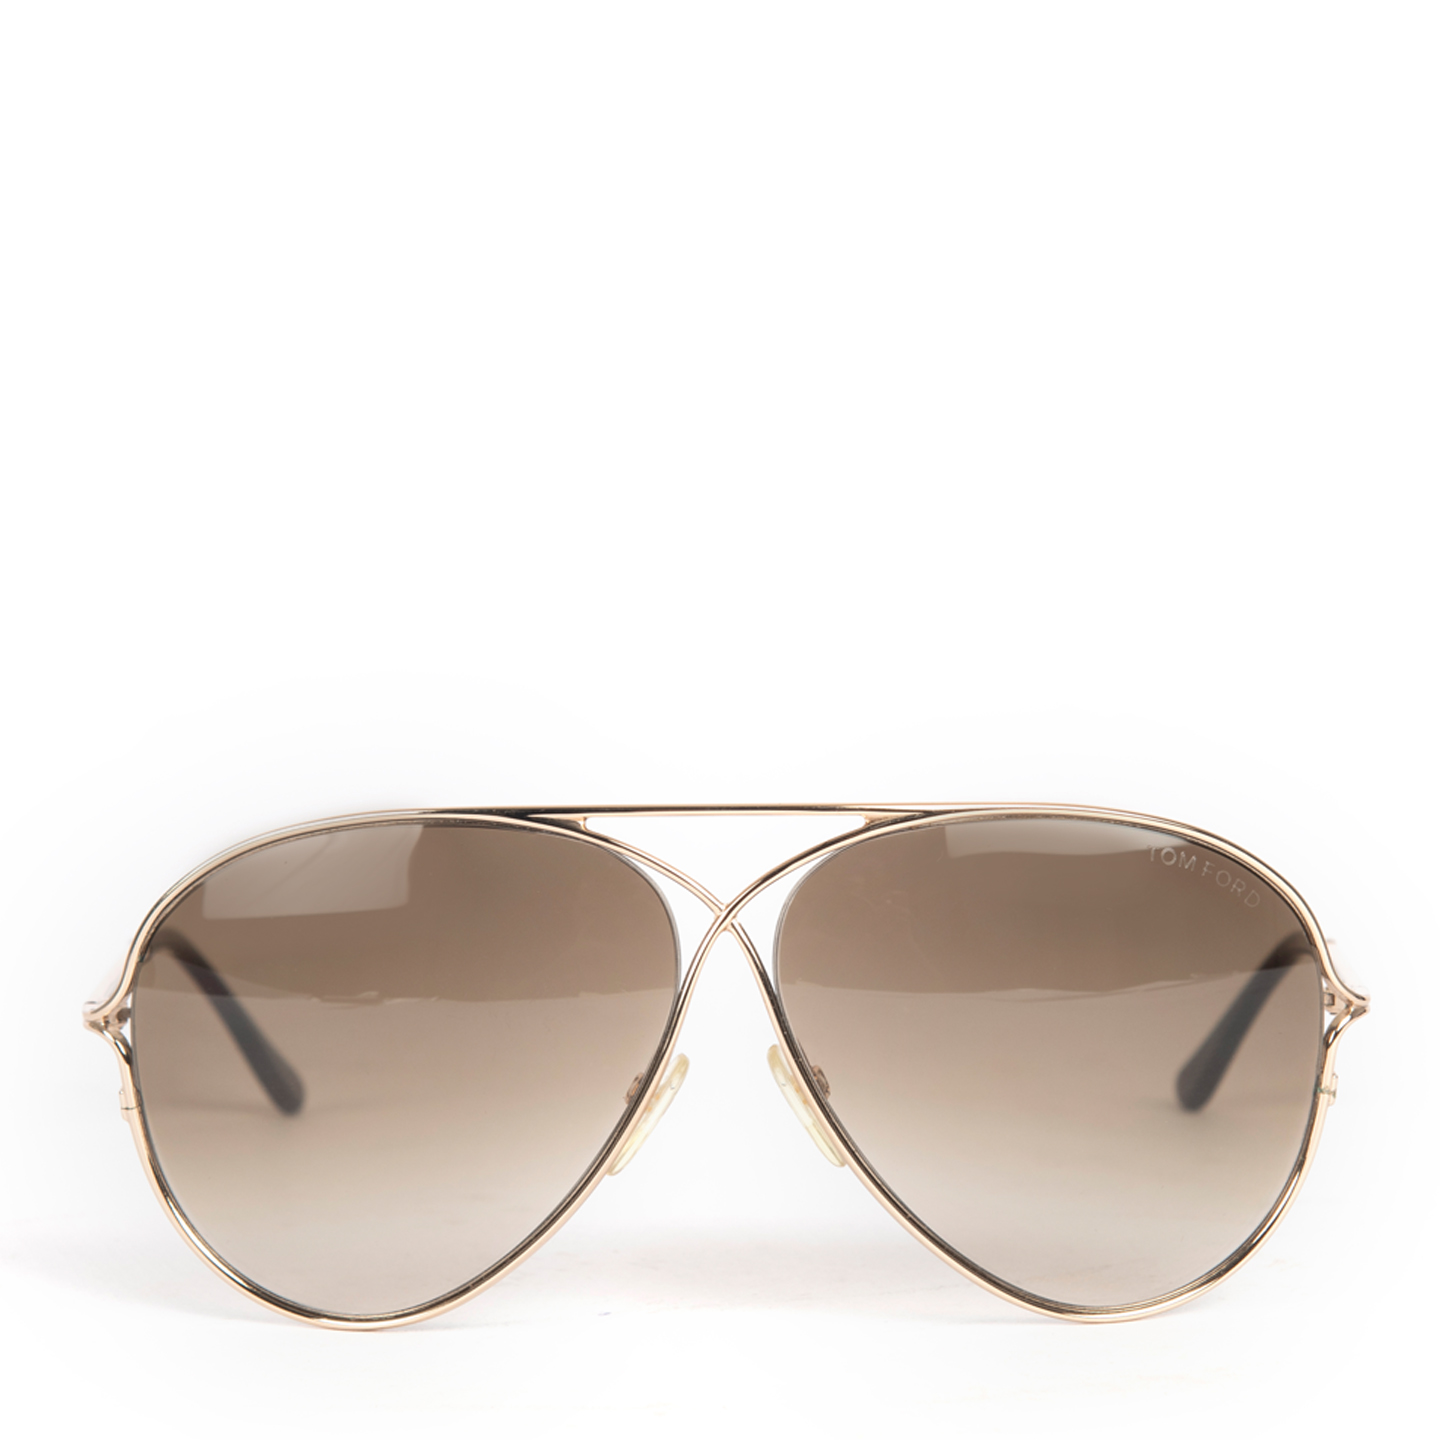 Tom Ford Peter Aviator Sunglasses TF142, Gold - LabelCentric